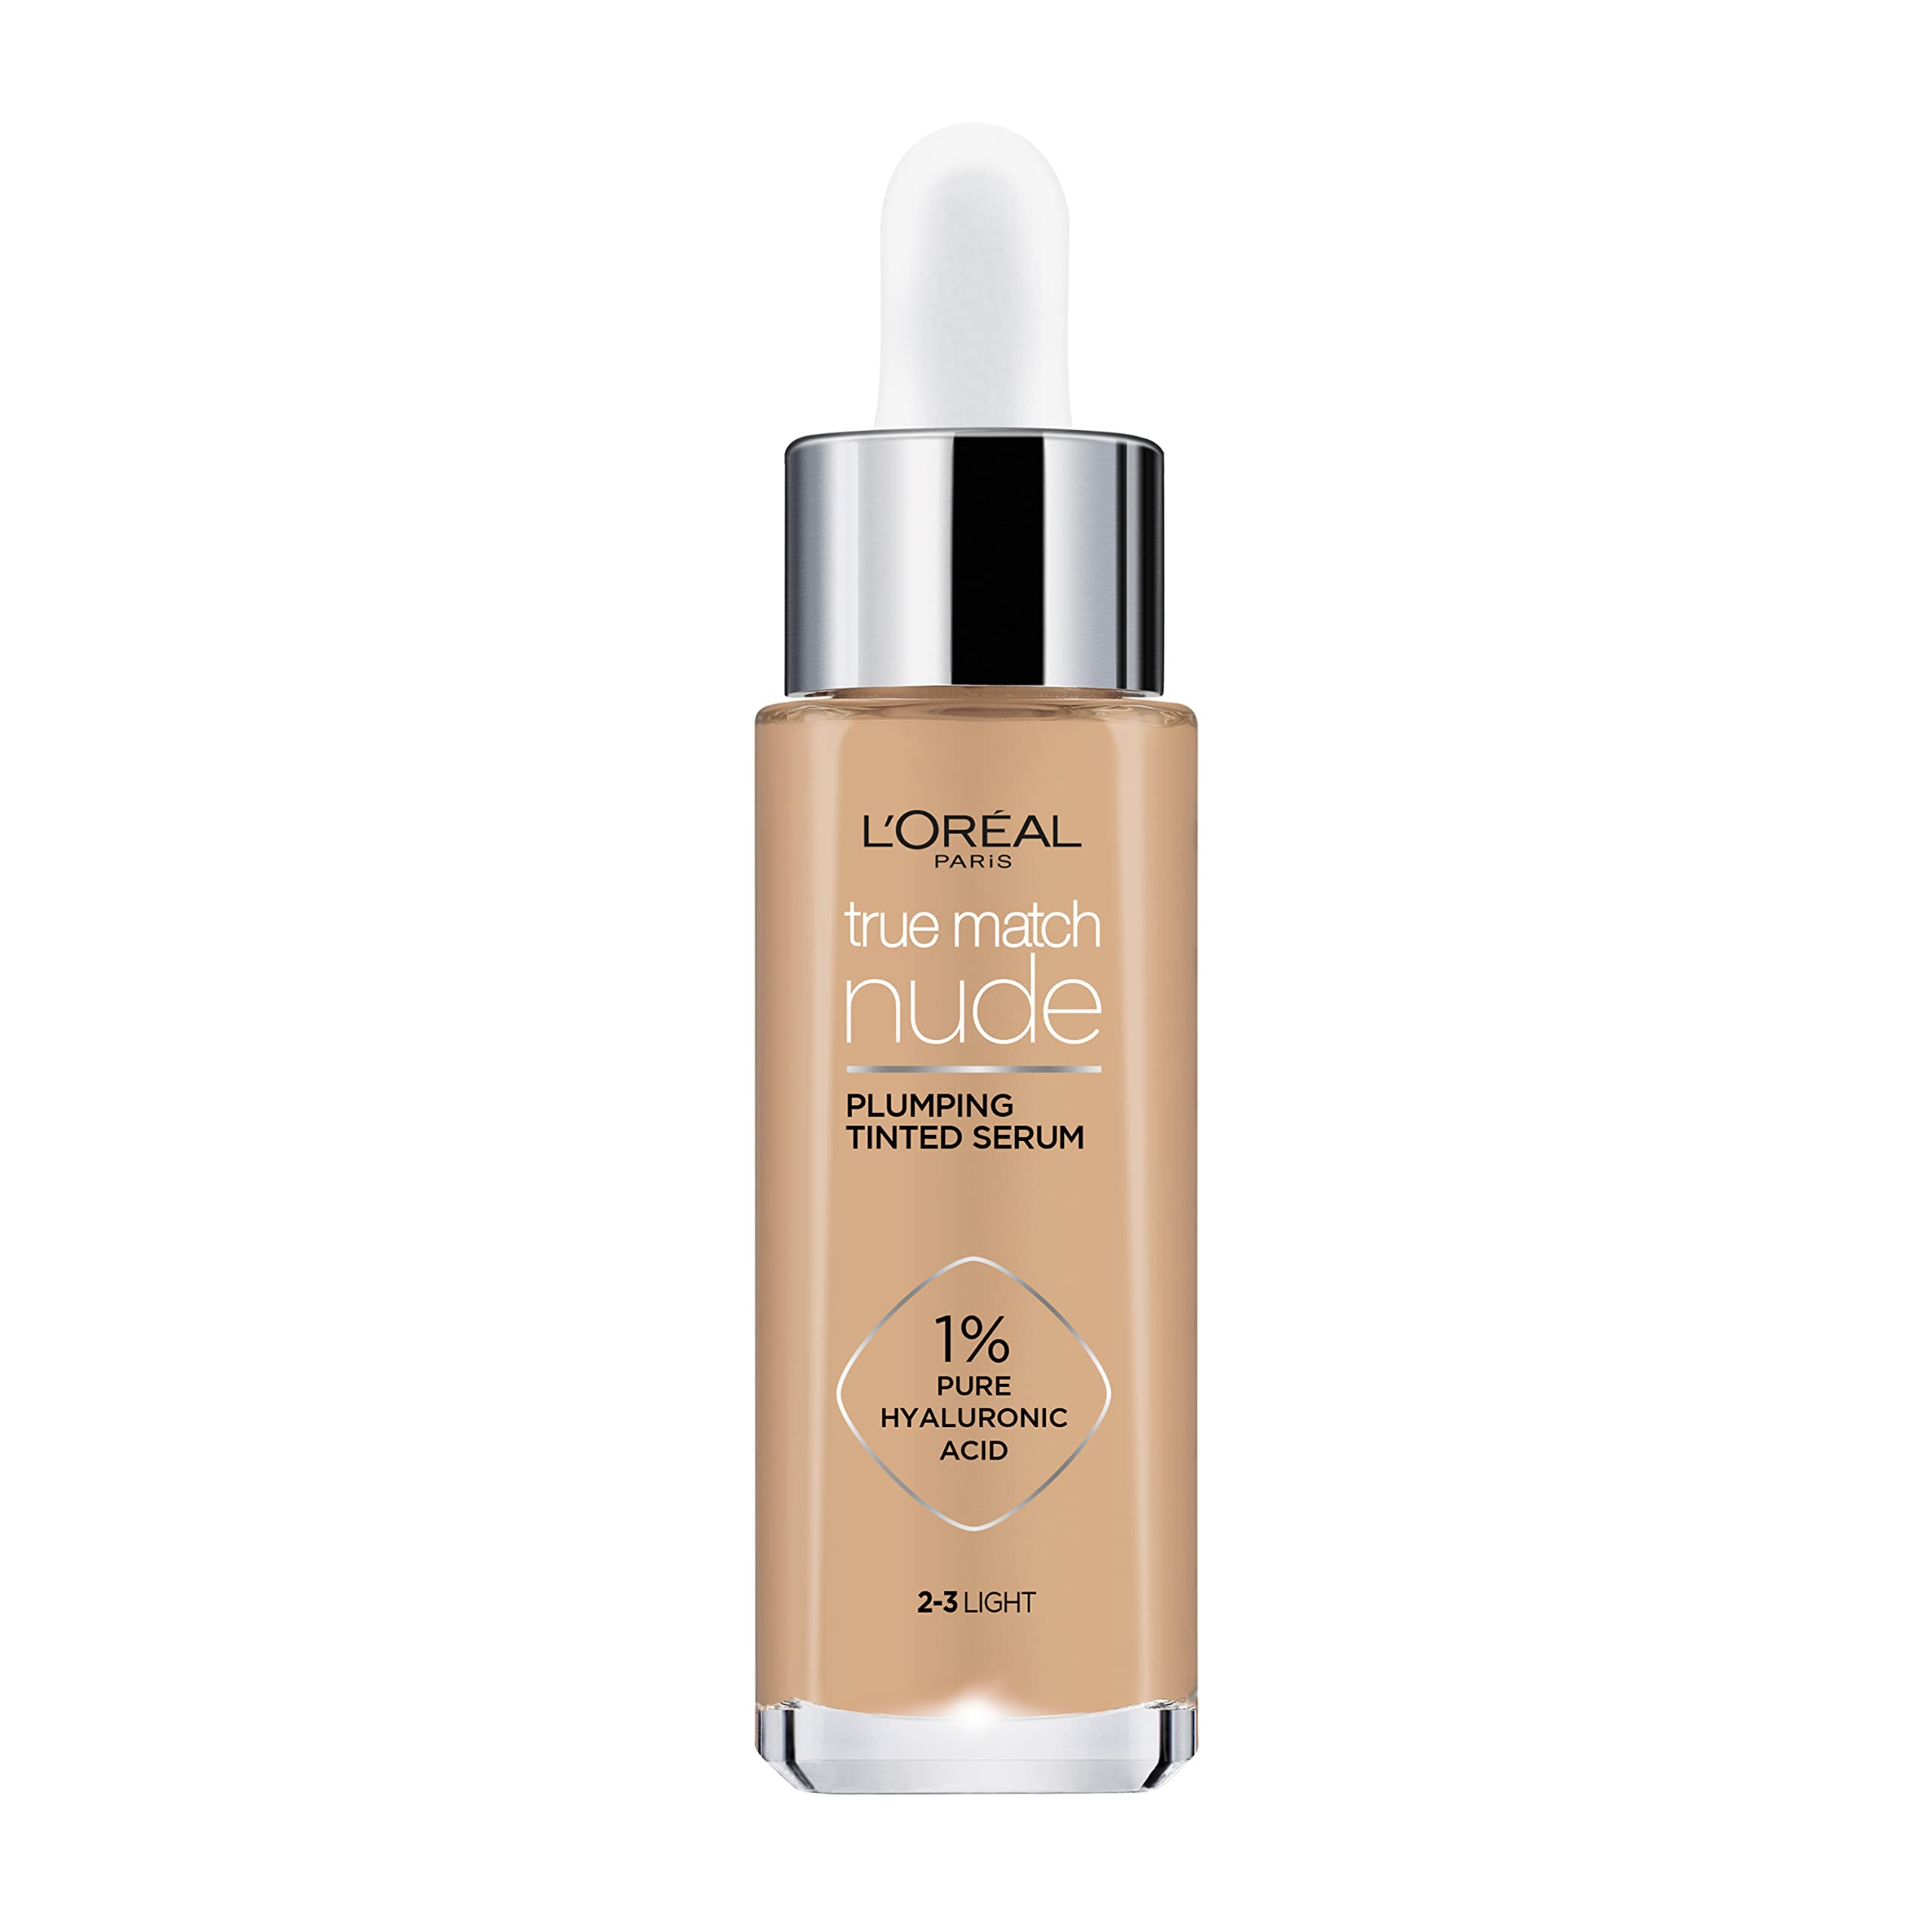 L'Oreal Paris True Match Nude Plumping Tinted Serum, 1% Hyaluronic Acid, Shade 2-3, Light, Instantly Evens, Brightens and Hydrates Skin